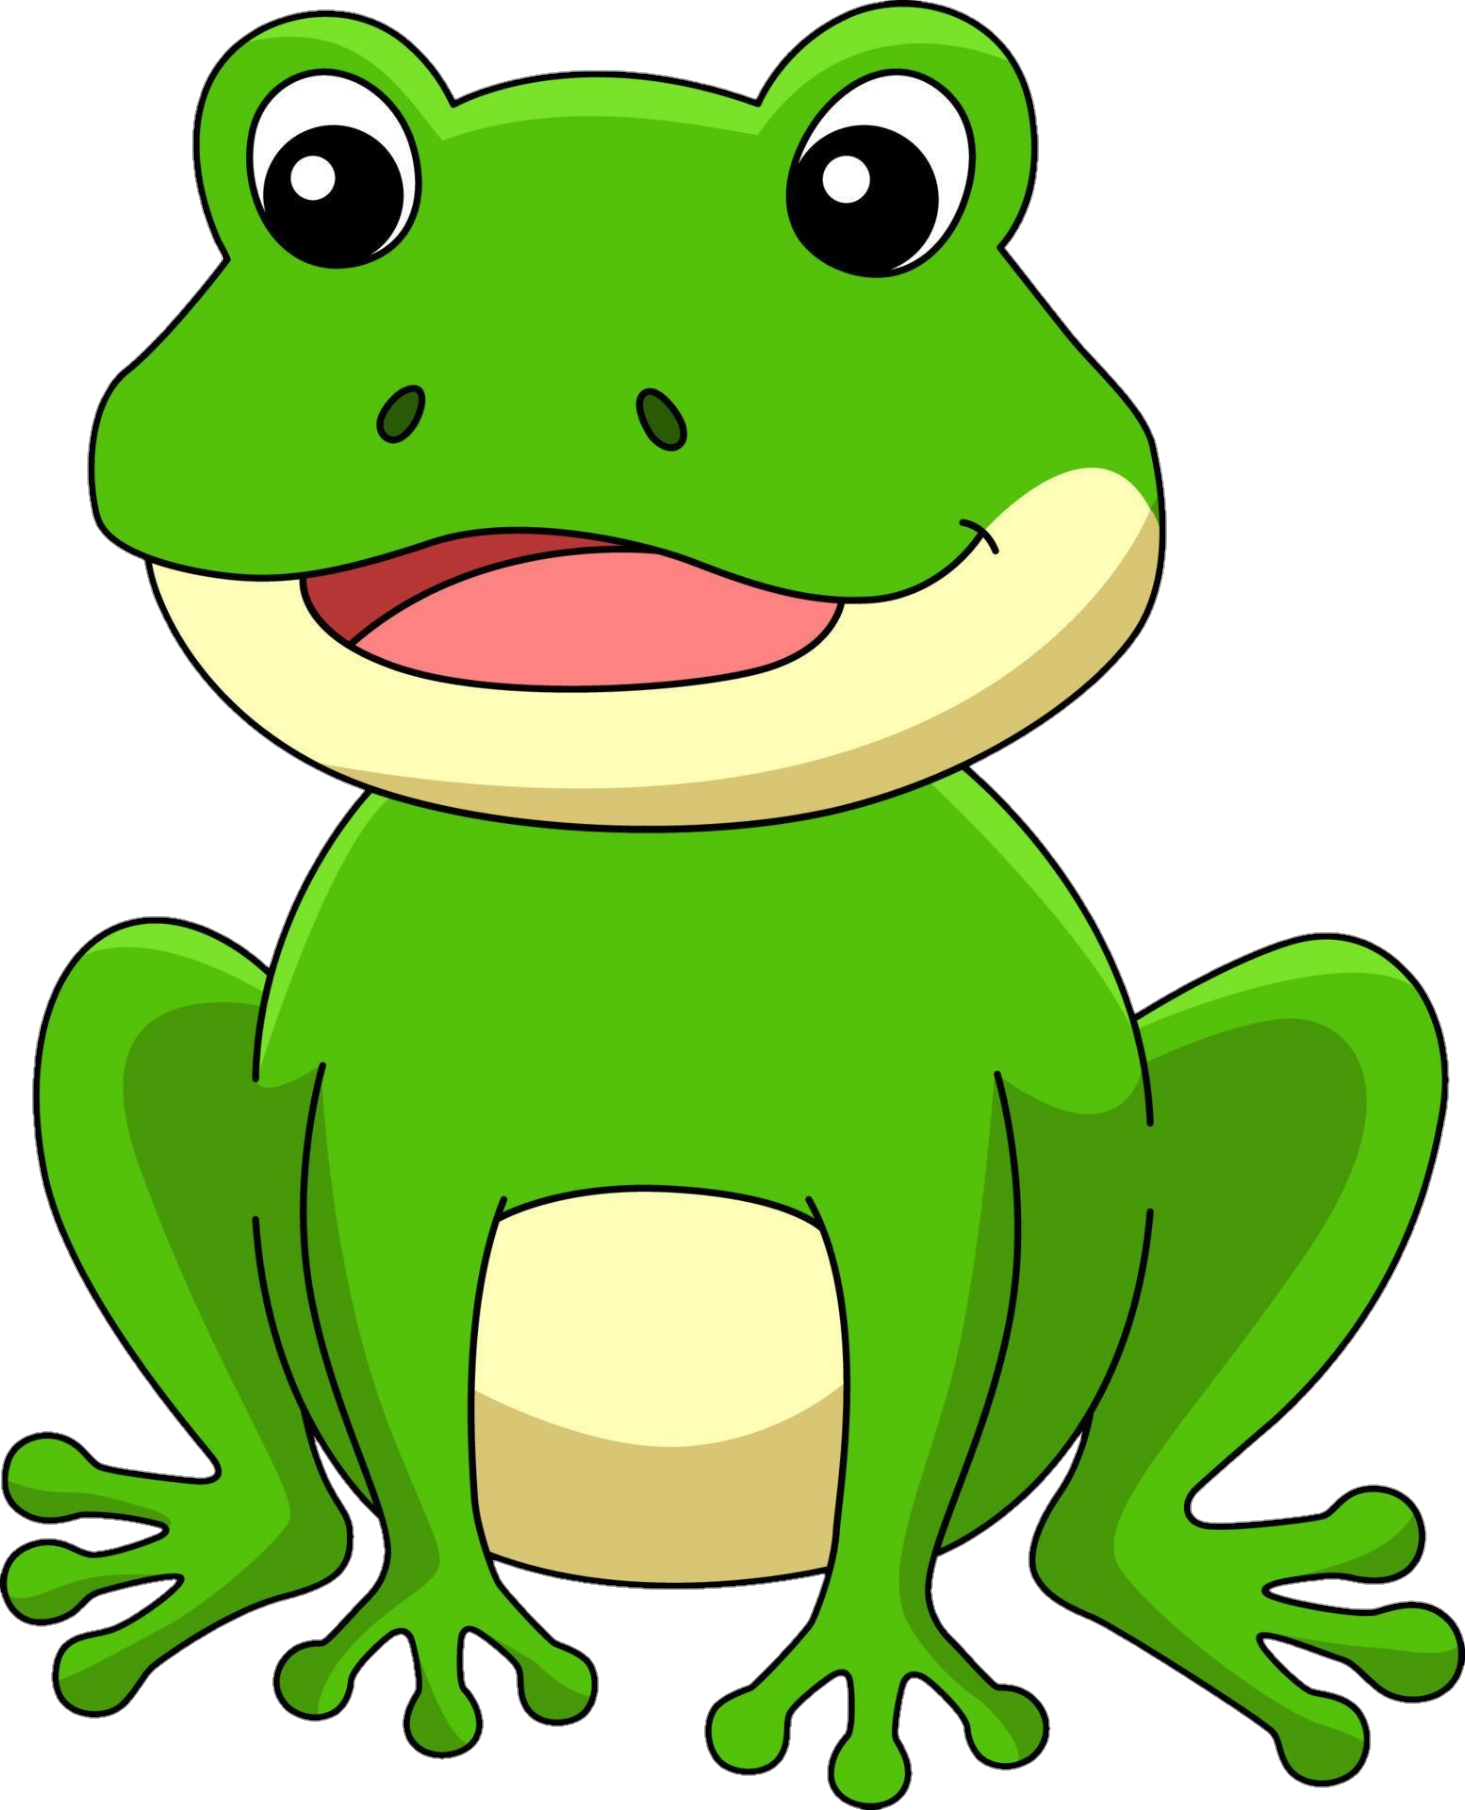 frog-png-image-from-pngfre-9